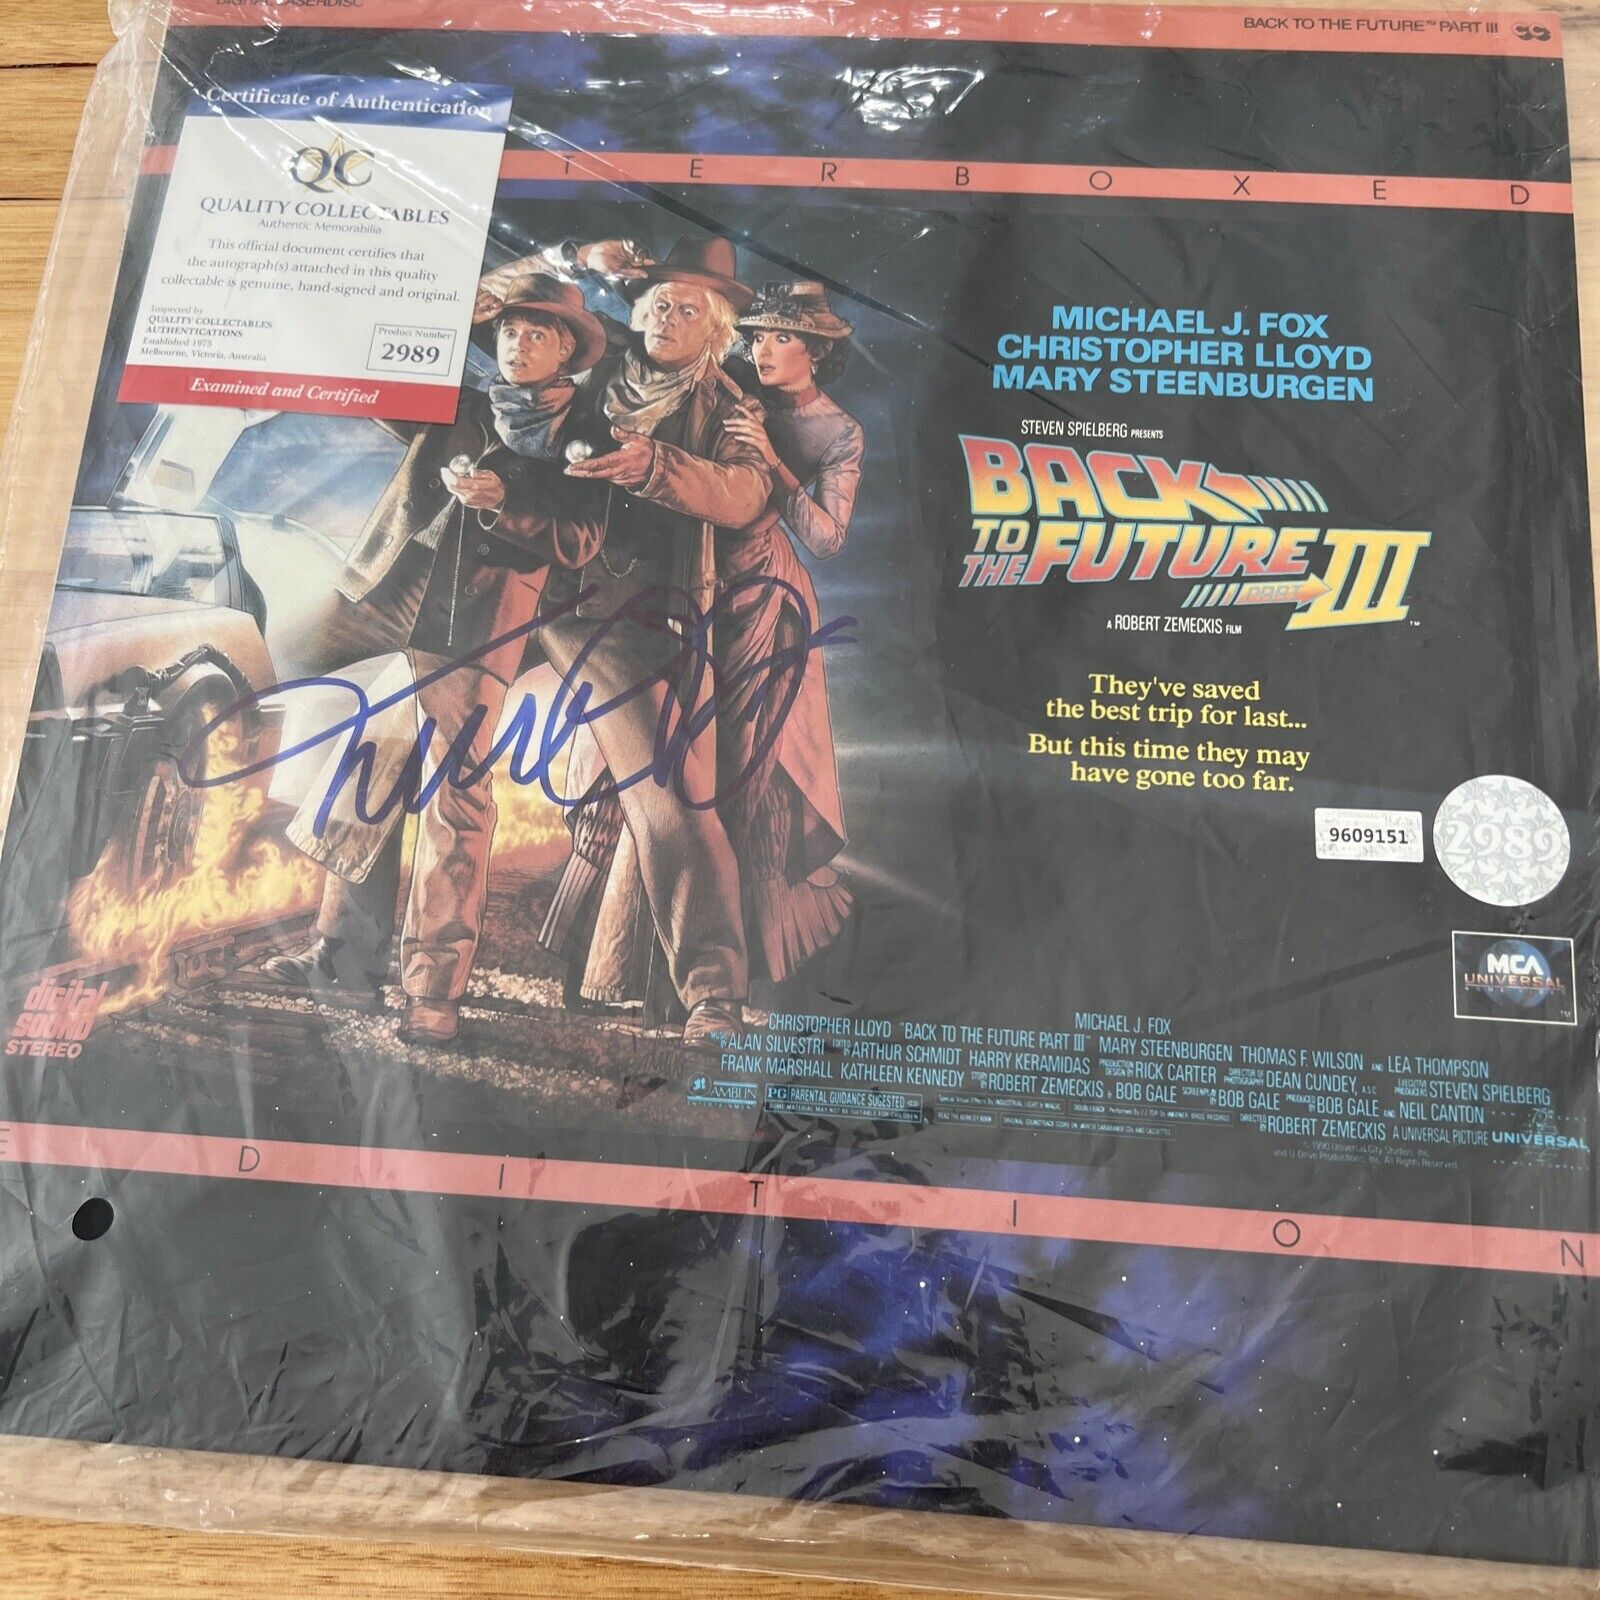 Michael J Fox Signed Laser Disc Cover COA from top rated seller AAA Item Rare